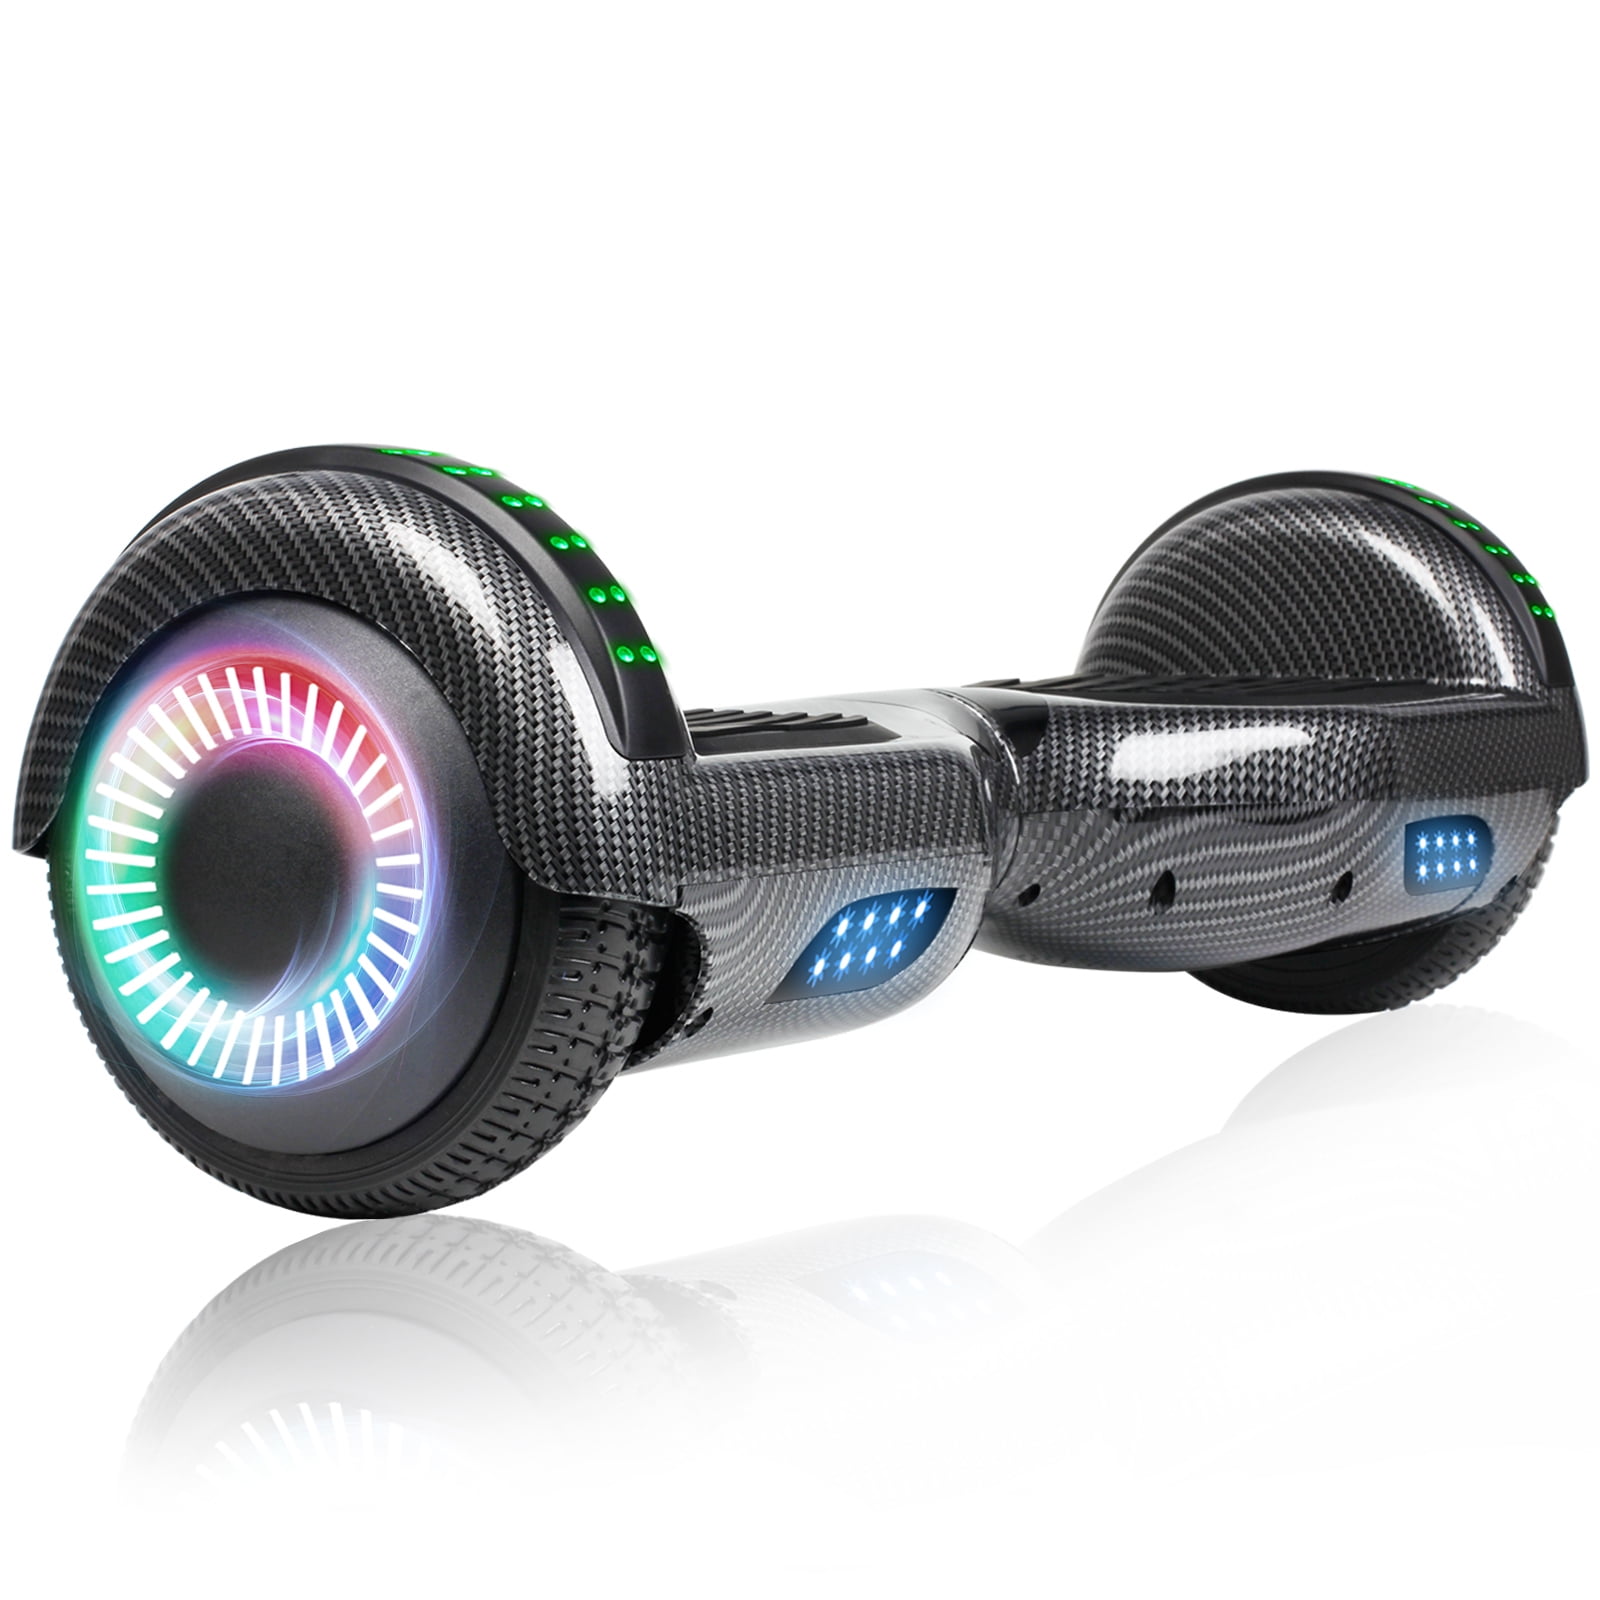 6.5" Bluetooth Hoverboards Scooter Electric Self-Balancing LED Black Without Bag 